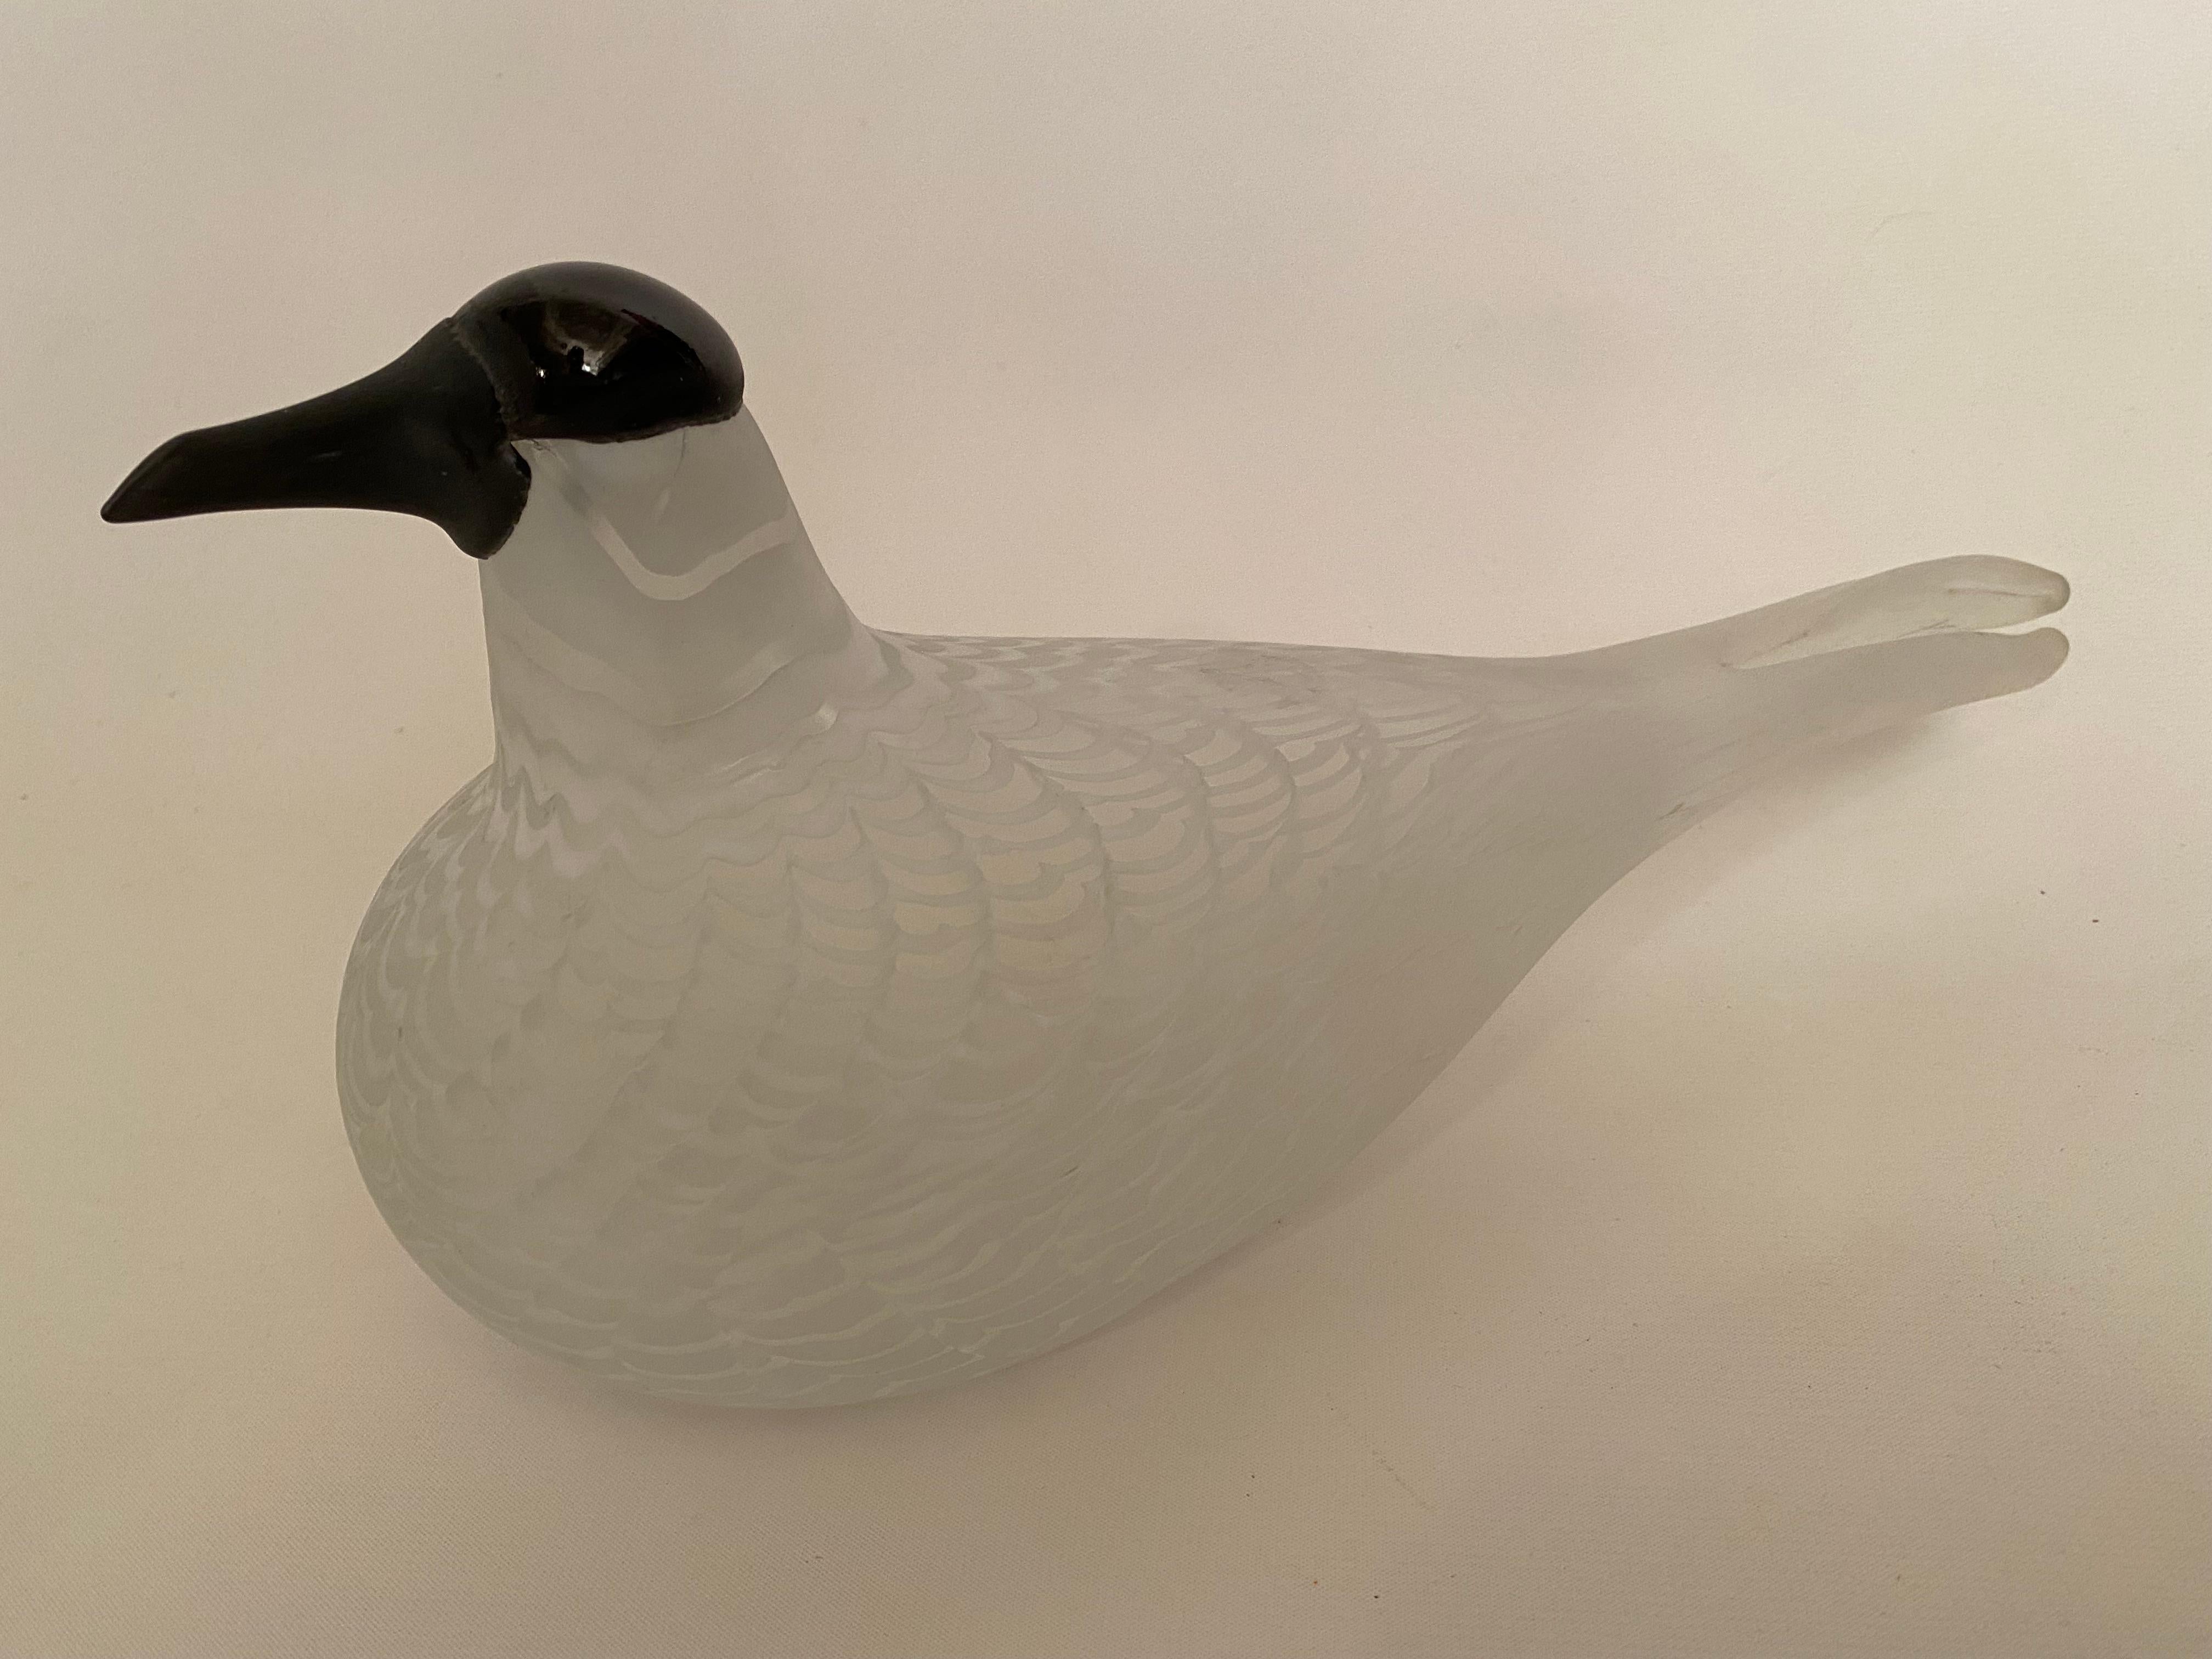 Oiva Toikka glass bird sculpture. Fully signed with foil label and inscribed, Nuutajarvi Notsjo, Oiva Toikka, 1412/3000. Good condition with no visible fissure like chips, cracks, scratches or restorations. There is some wear to base from age and